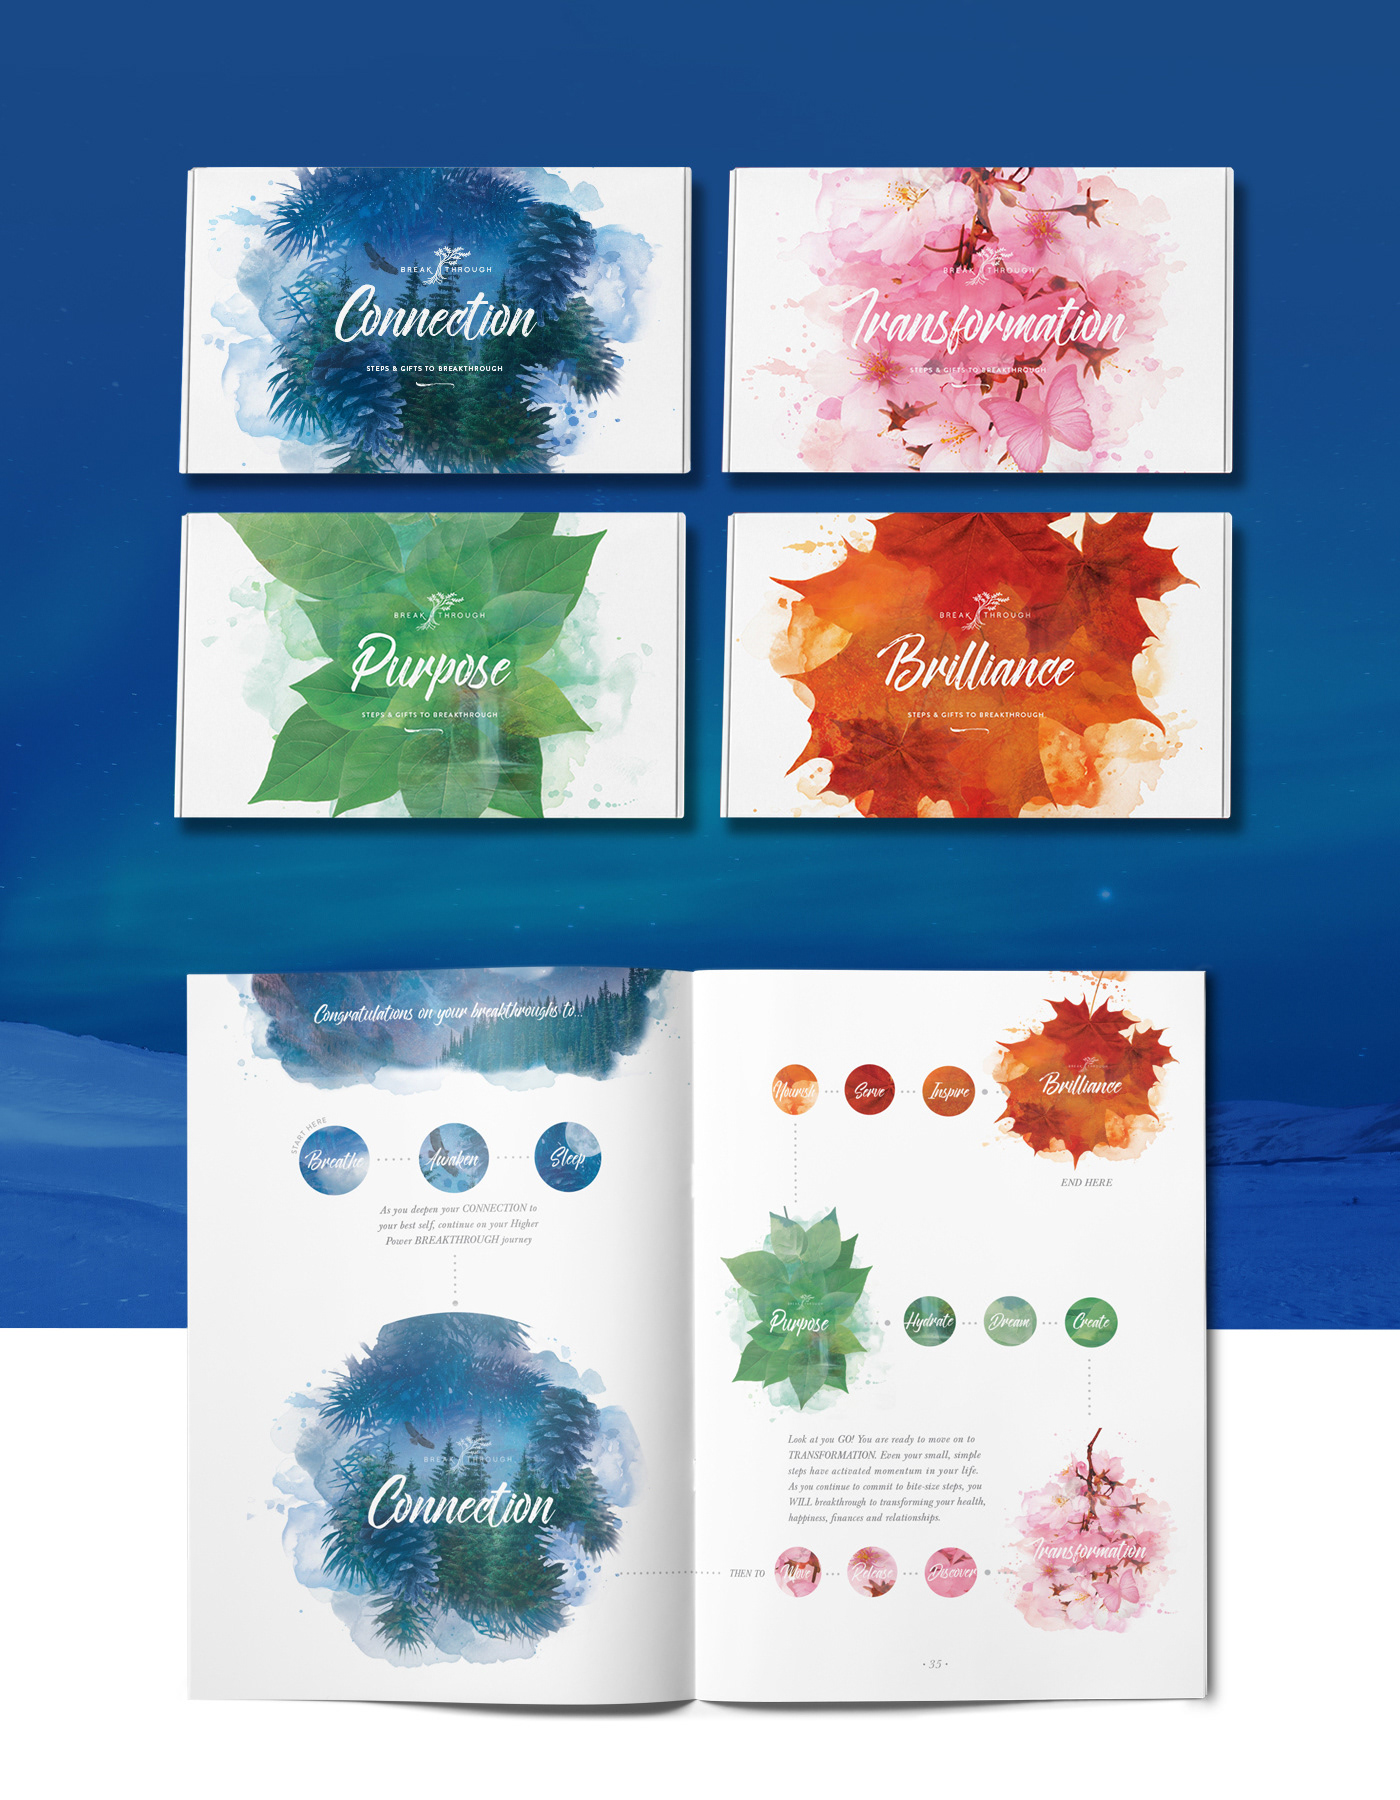 breakthrough packaging digital art photomontages editorial layout designs Graphic Design Typography inspire life coaching messages on cards seasonal nature themes boxes and kits Fall spring autumn winter